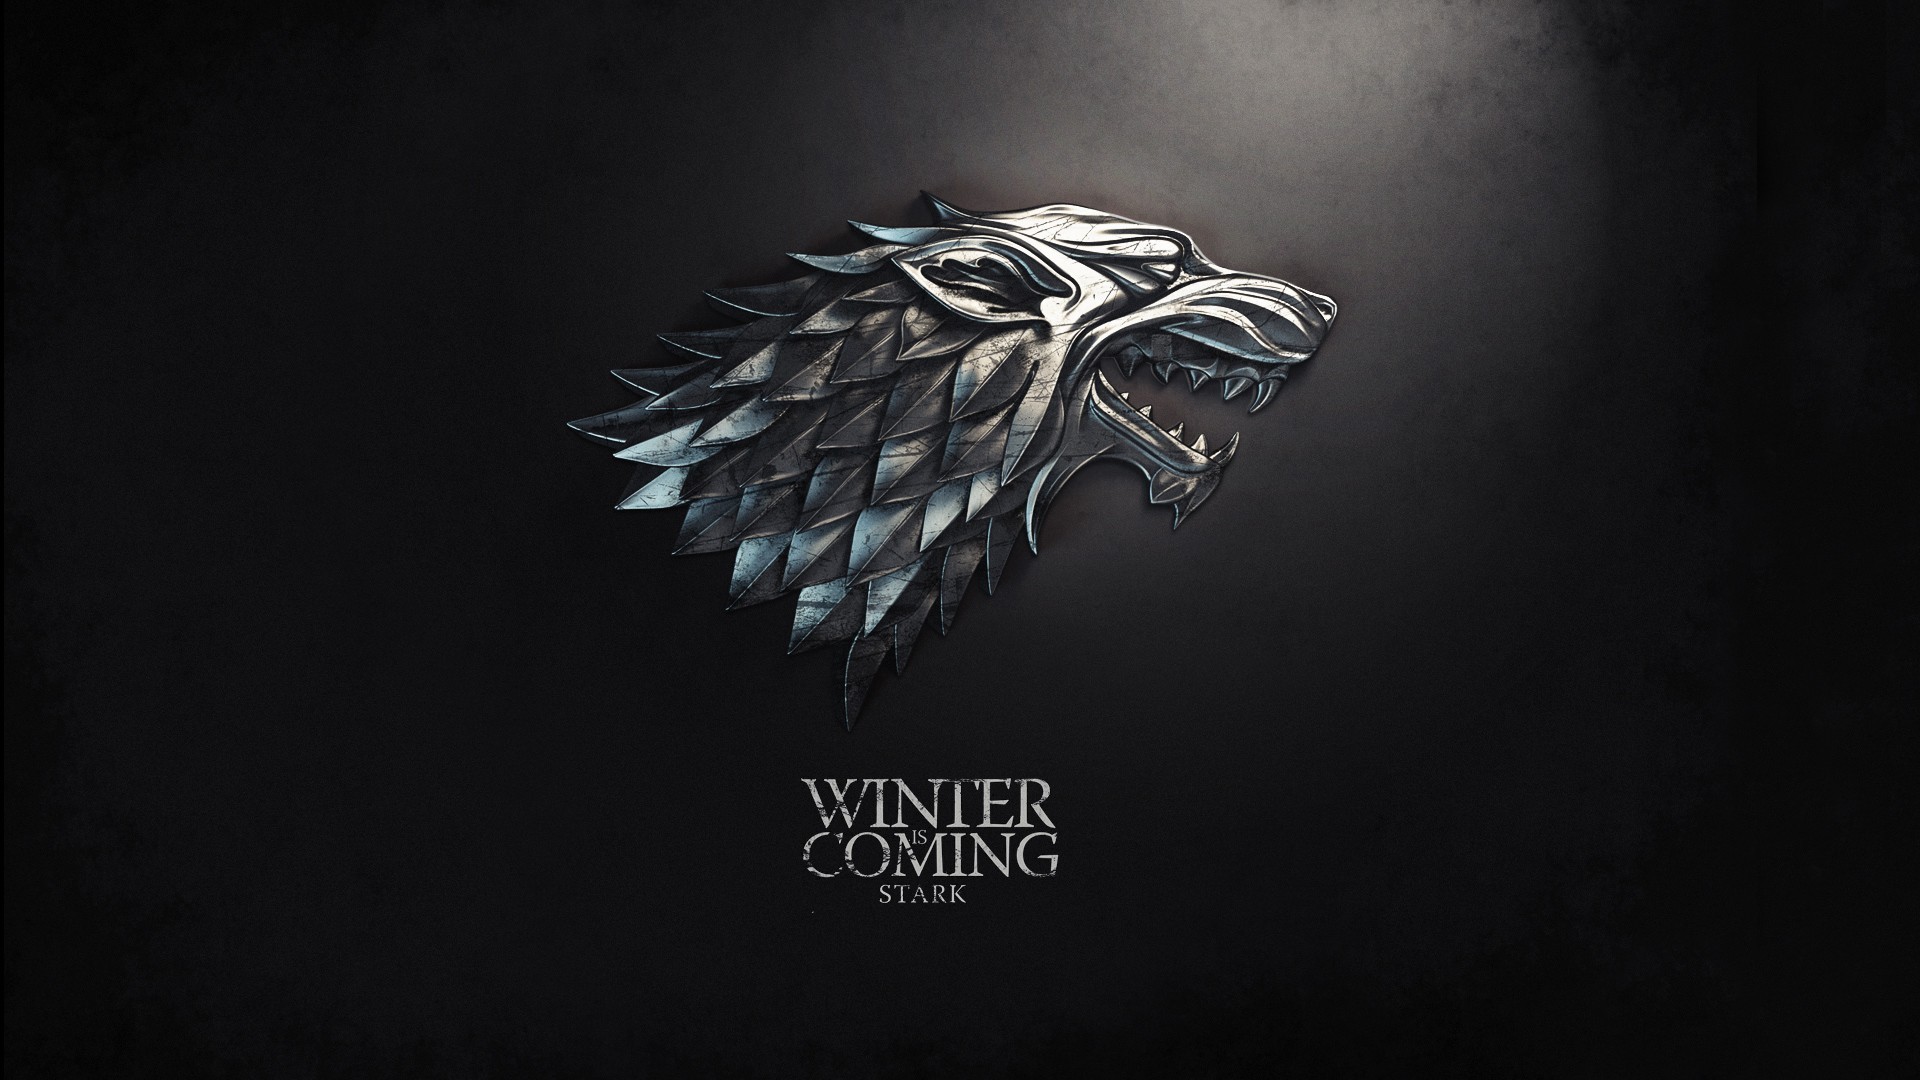 House Stark Game of Thrones Wallpaper with high-resolution 1920x1080 pixel. You can use this poster wallpaper for your Desktop Computers, Mac Screensavers, Windows Backgrounds, iPhone Wallpapers, Tablet or Android Lock screen and another Mobile device